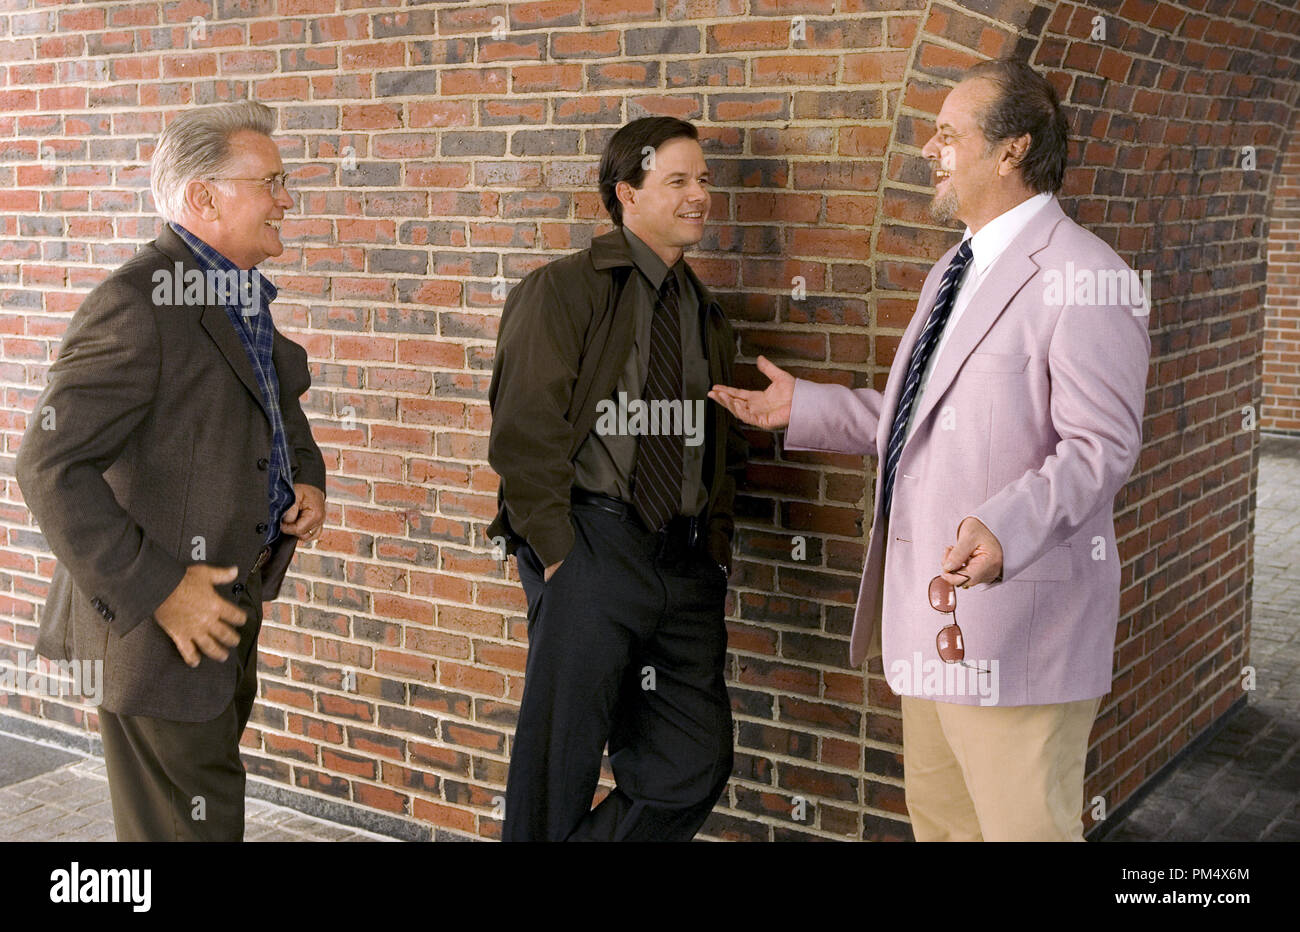 Studio Publicity Still from 'The Departed' Martin Sheen, Mark Wahlberg, Jack Nicholson © 2006 Warner Photo credit: Andrew Cooper   File Reference # 307372369THA  For Editorial Use Only -  All Rights Reserved Stock Photo